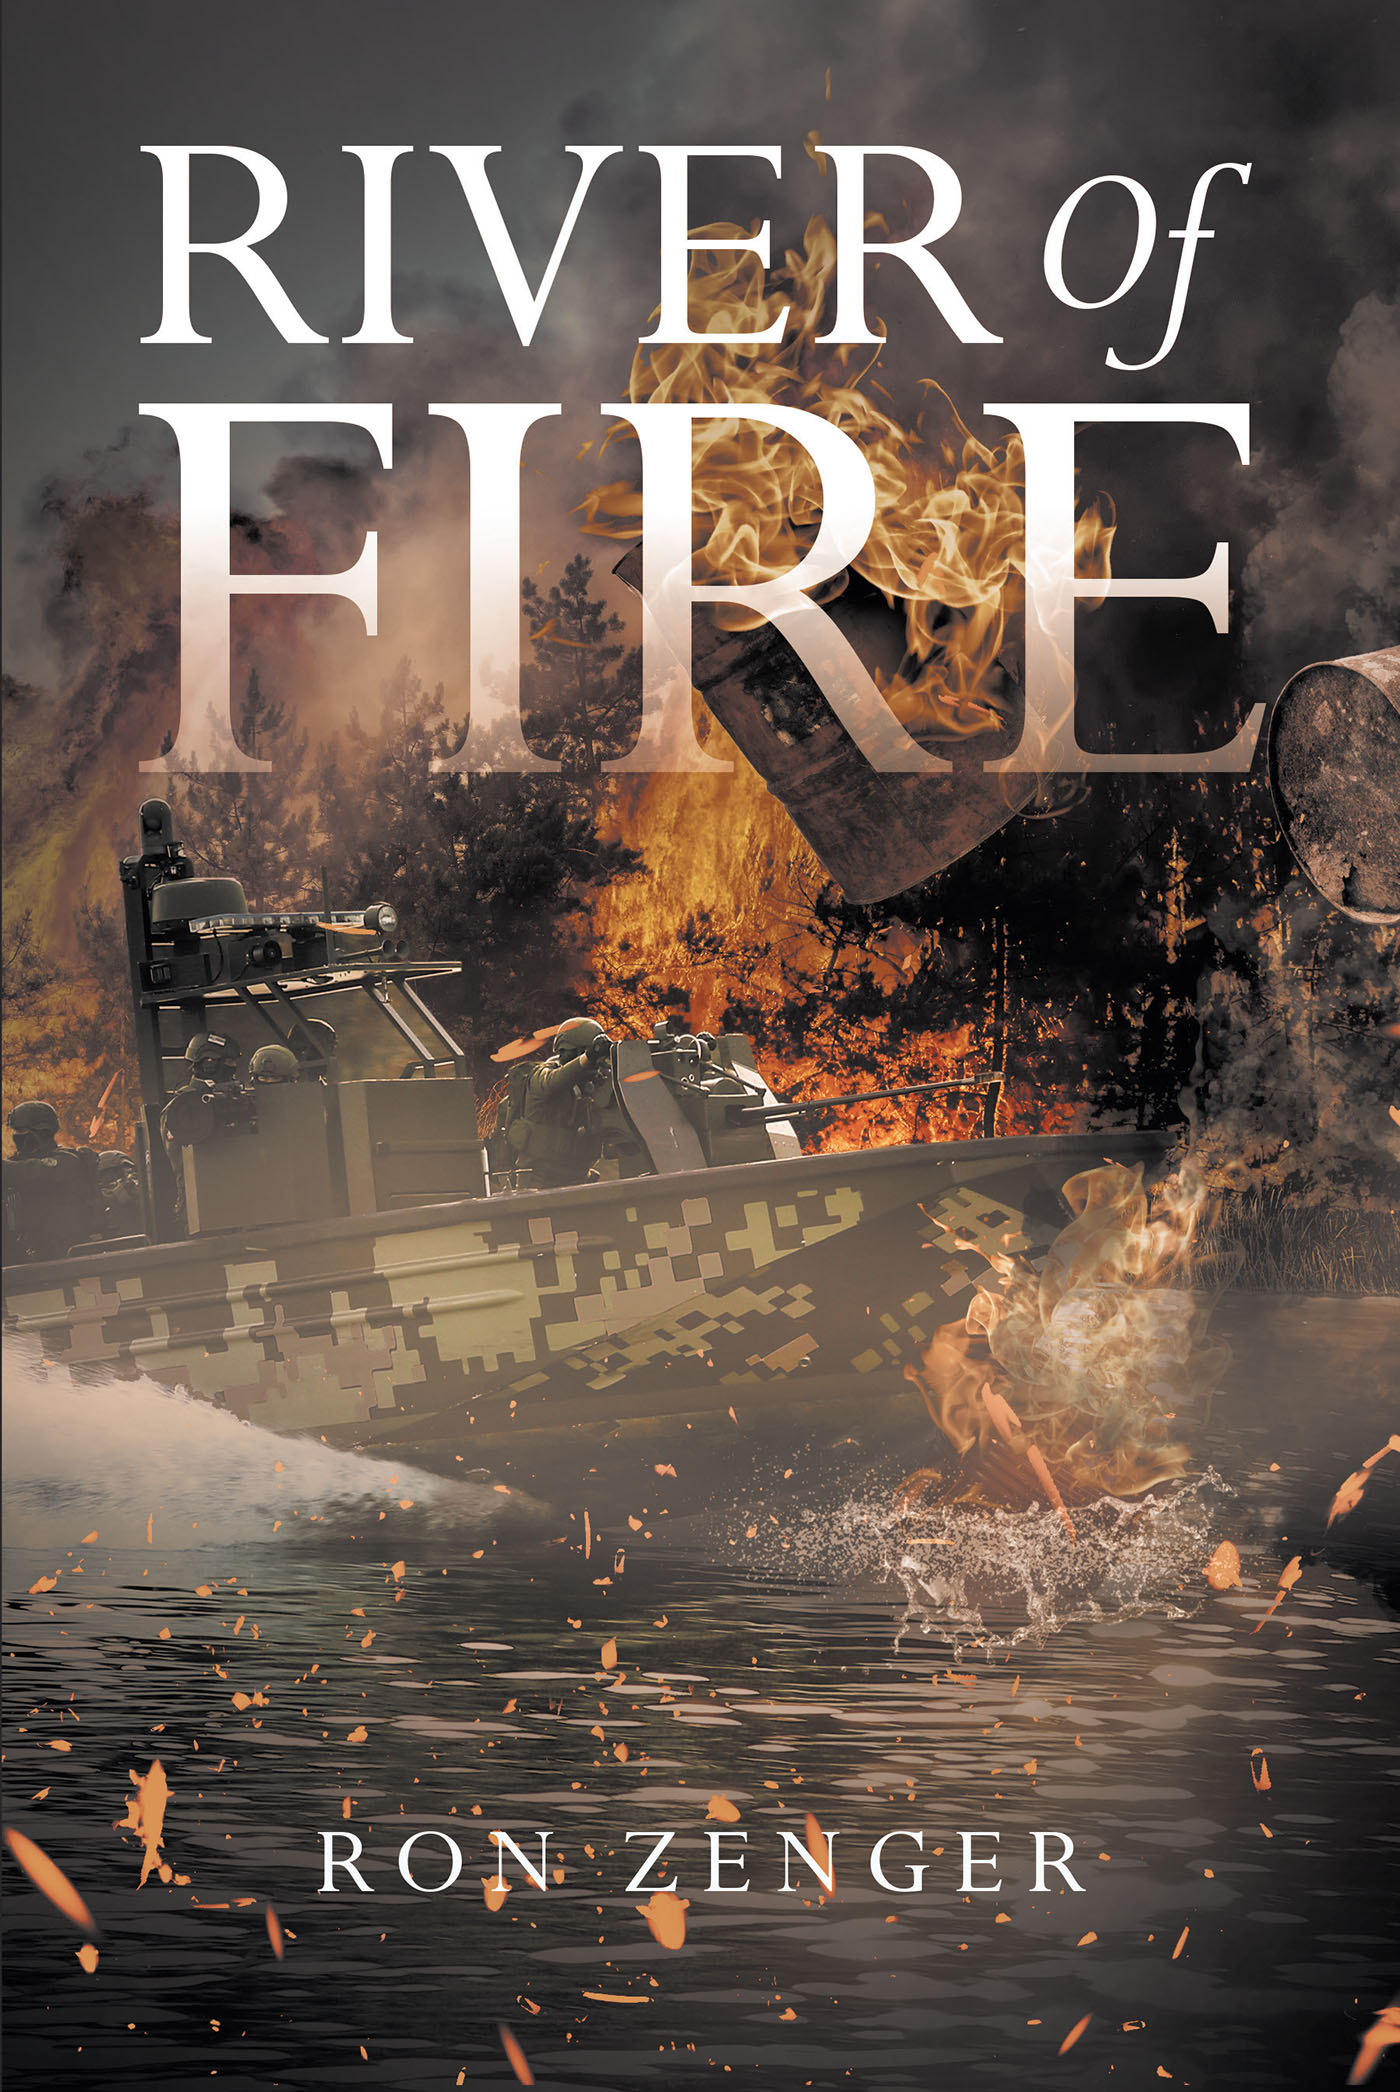 Author Ron Zenger’s New Book, "River of Fire," is a Story About a Navy Commander & His Deep-Seated Hatred Toward the Marine Corps, Partially Inspired by the Author’s Life